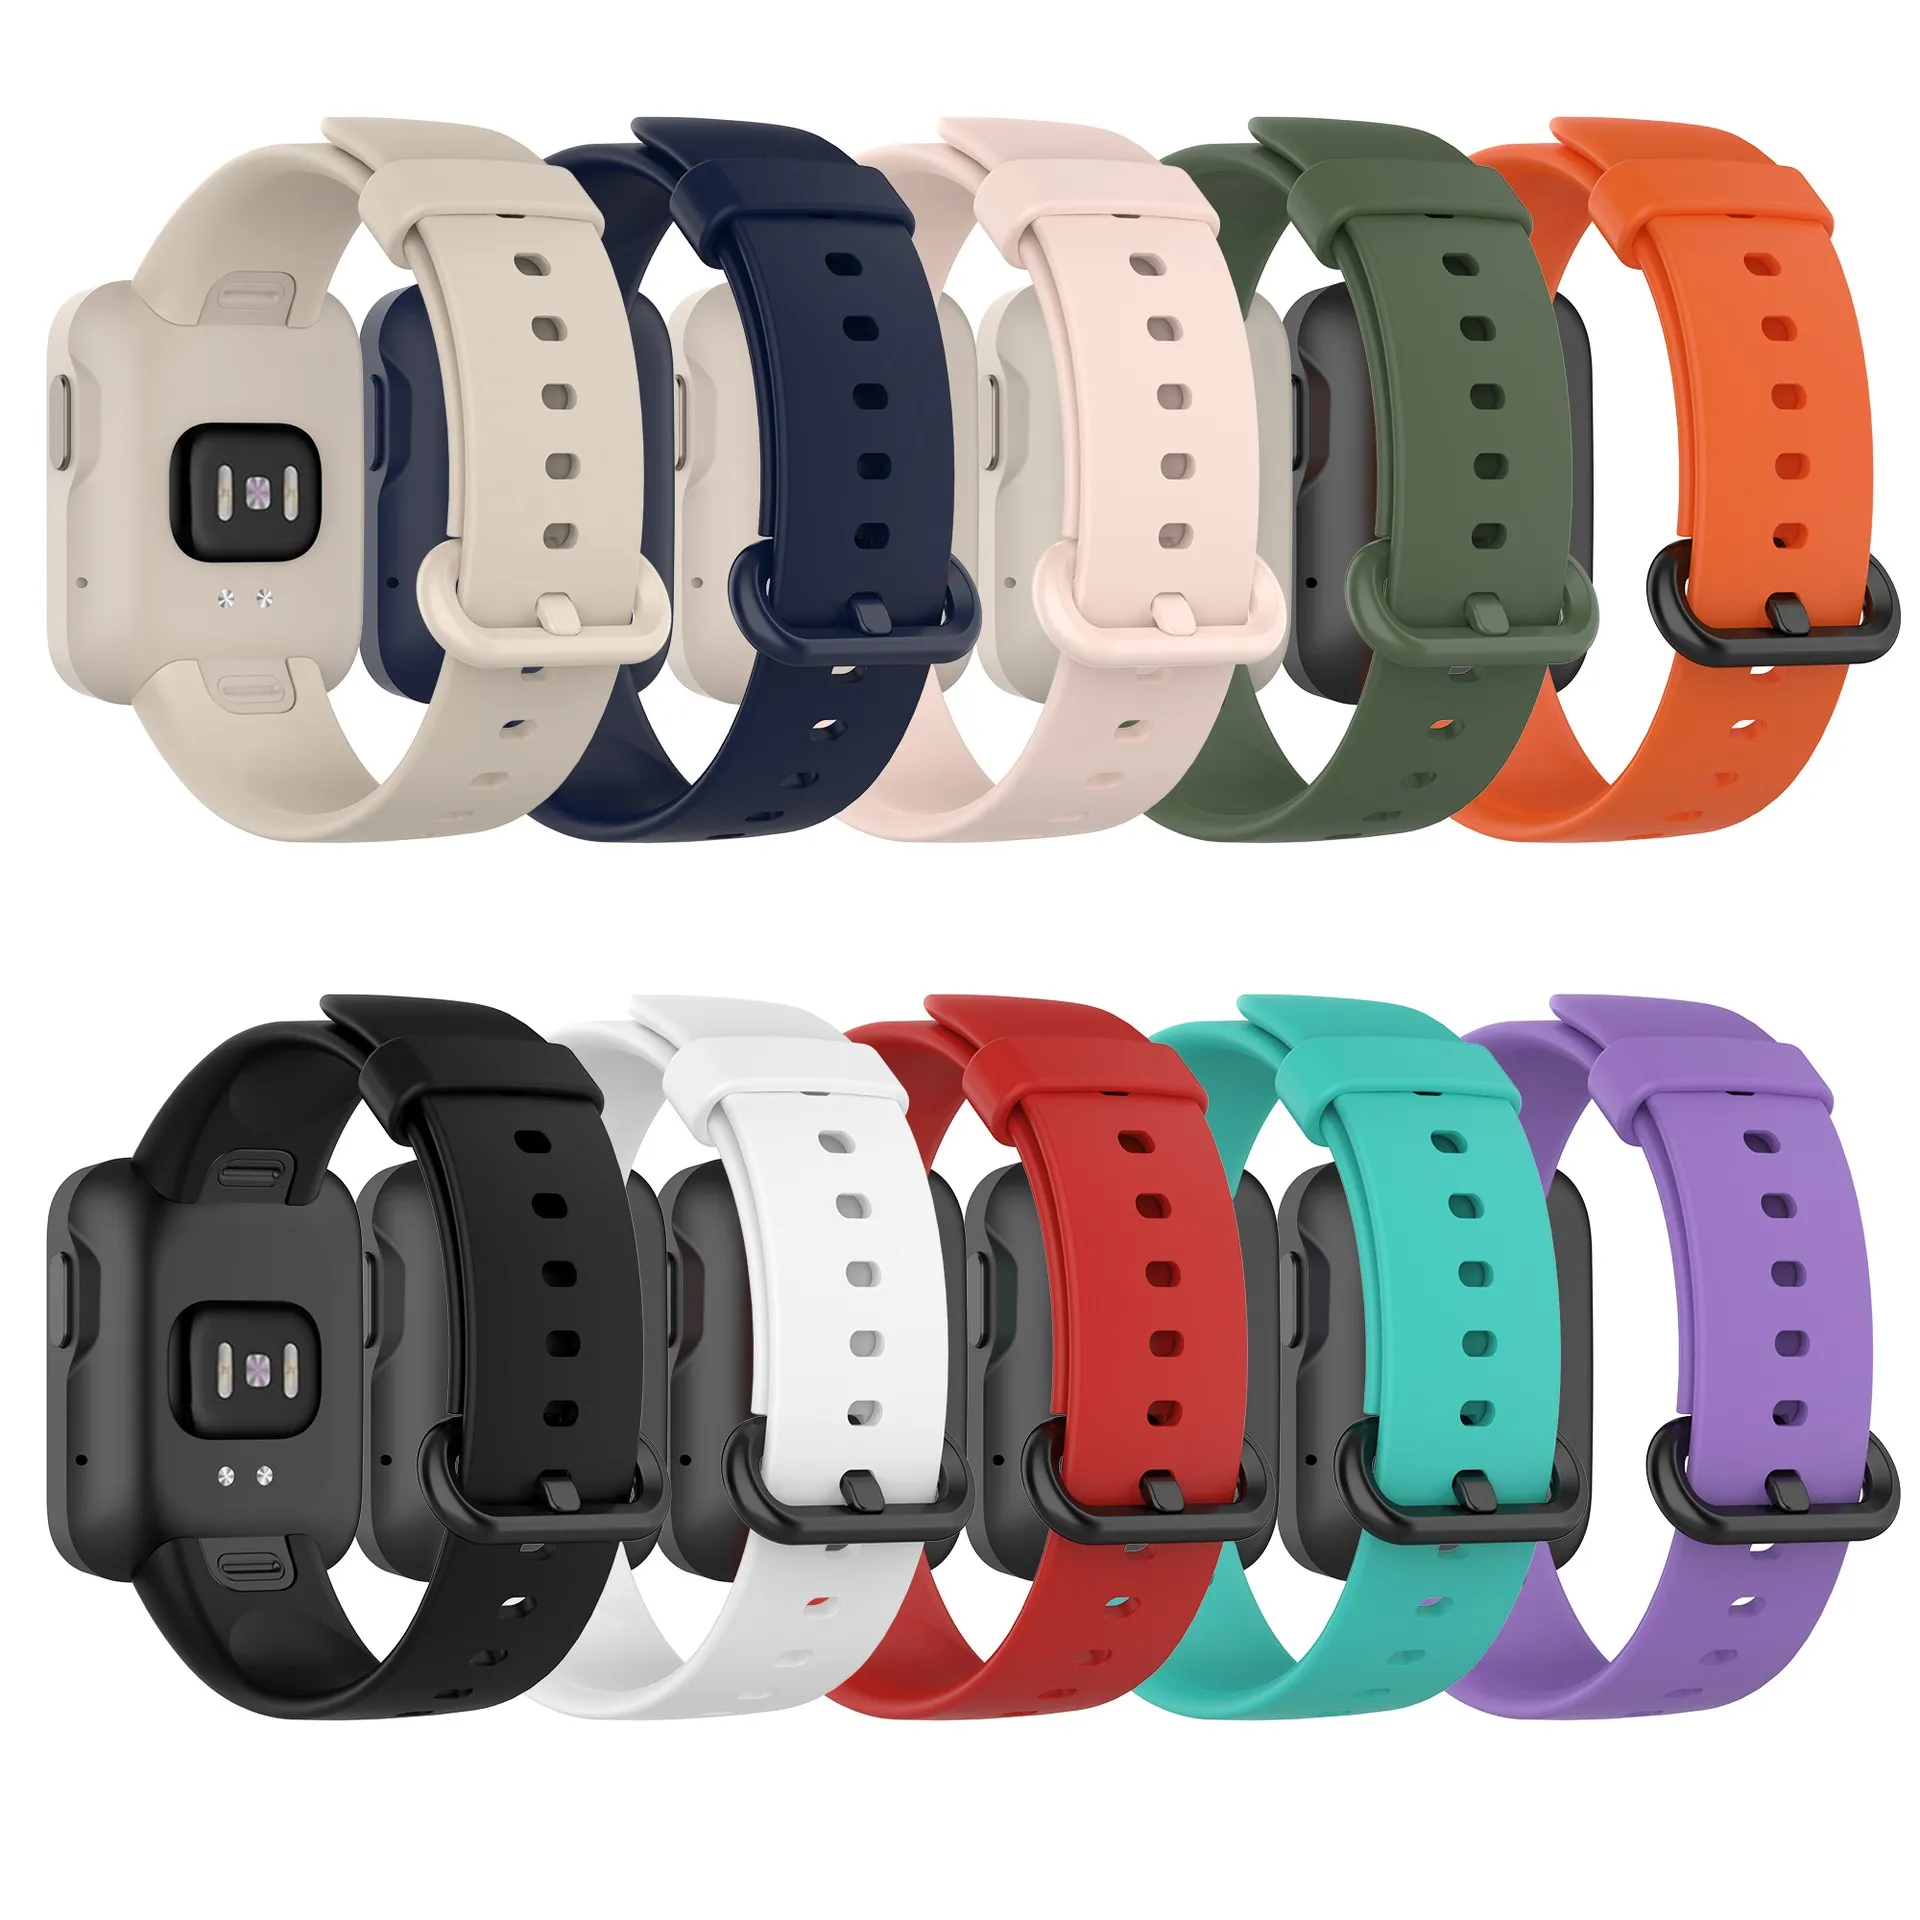 Wholesale Silicone Replacement Wristband For Xiaomi Redmi MI Redmi Smart Watch  LIte Sport From Global_deal, $1.72